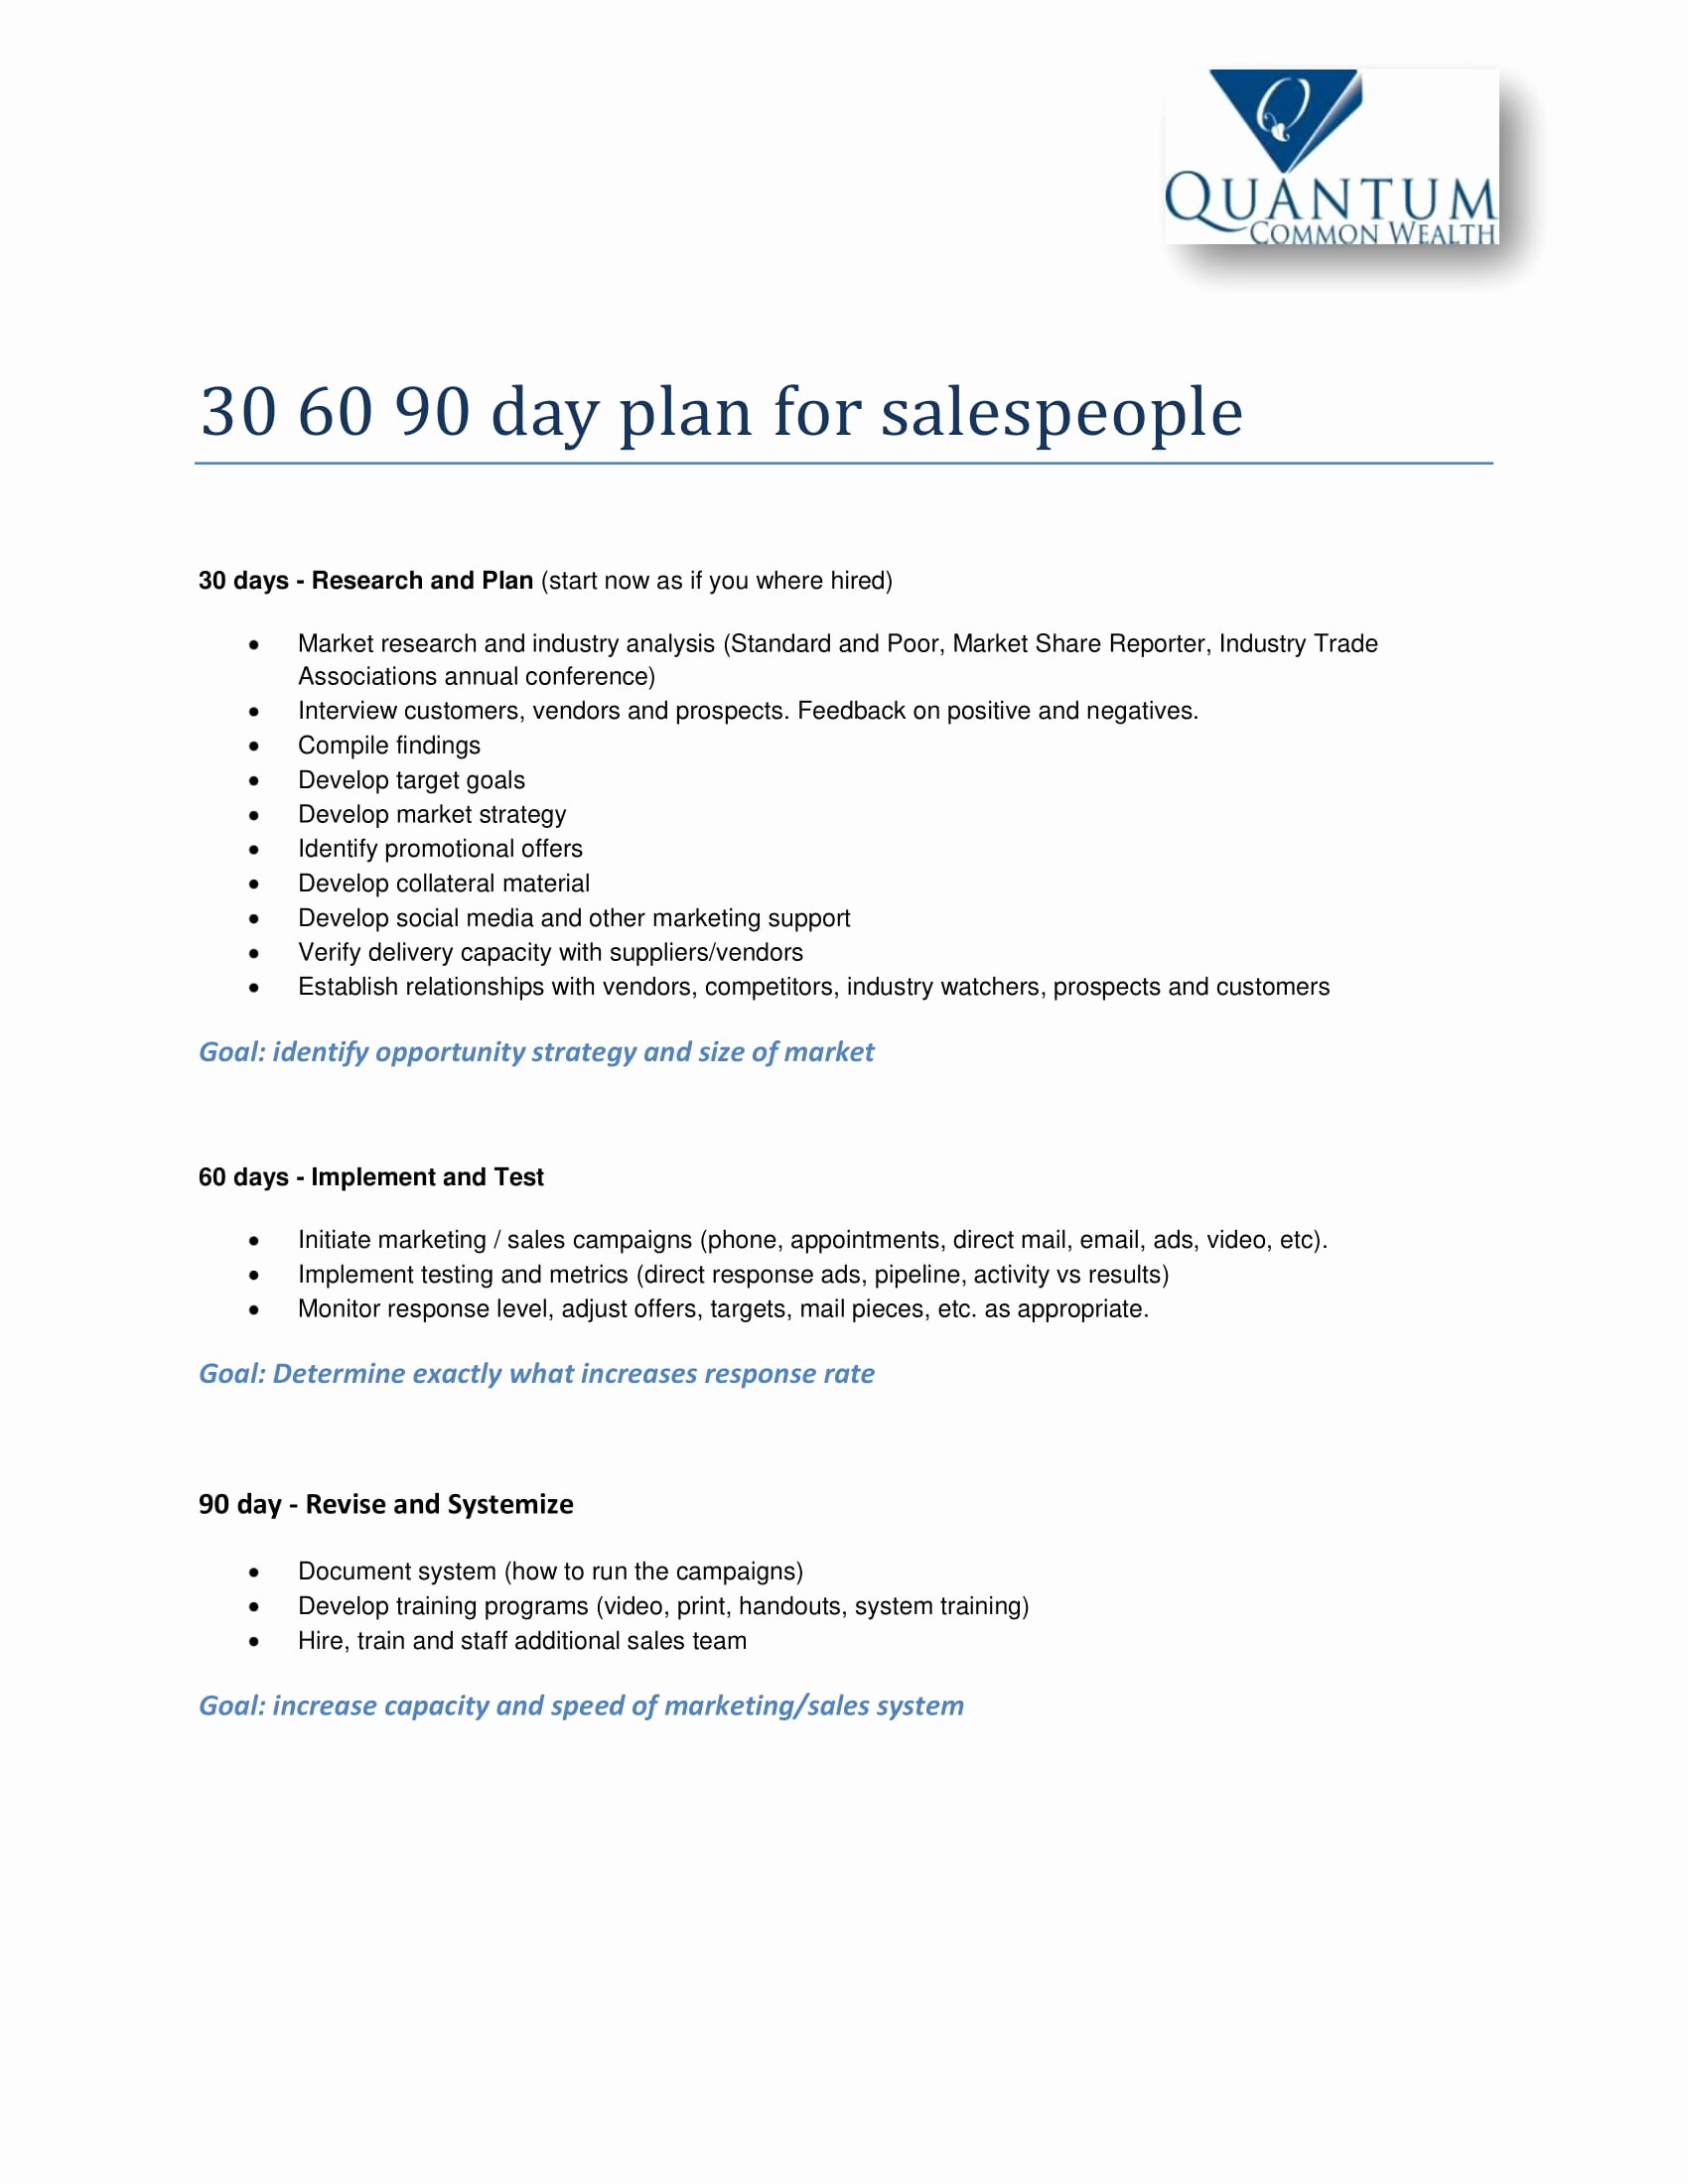 30 60 90 Plan Templates Best Of 12 30 60 90 Day Sales Plan Examples Pdf Word